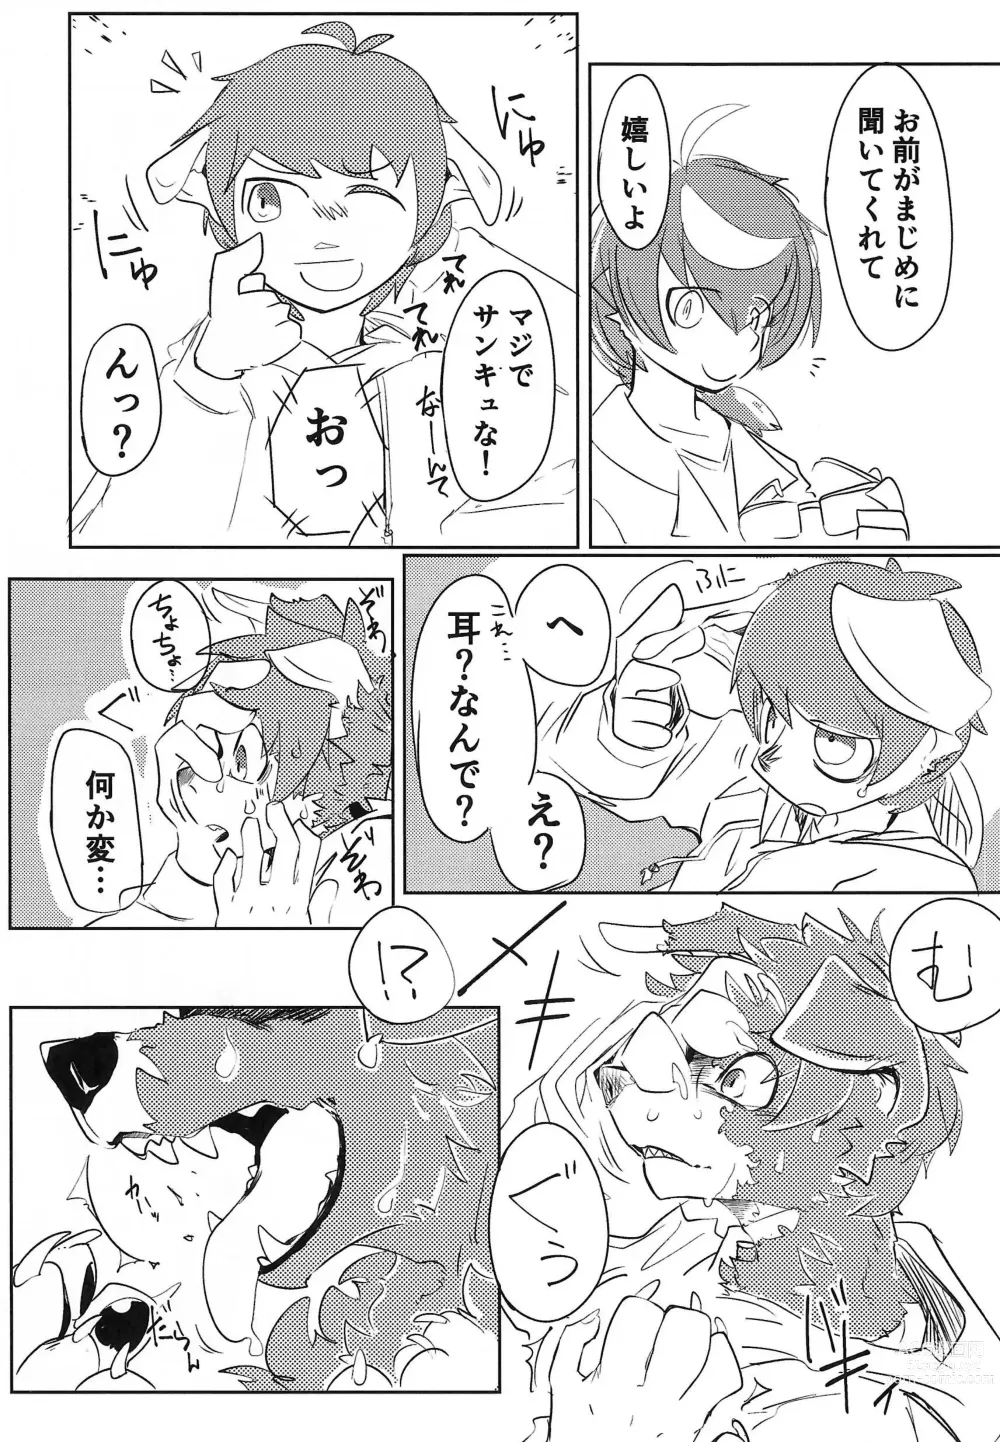 Page 10 of doujinshi Stray Dogs